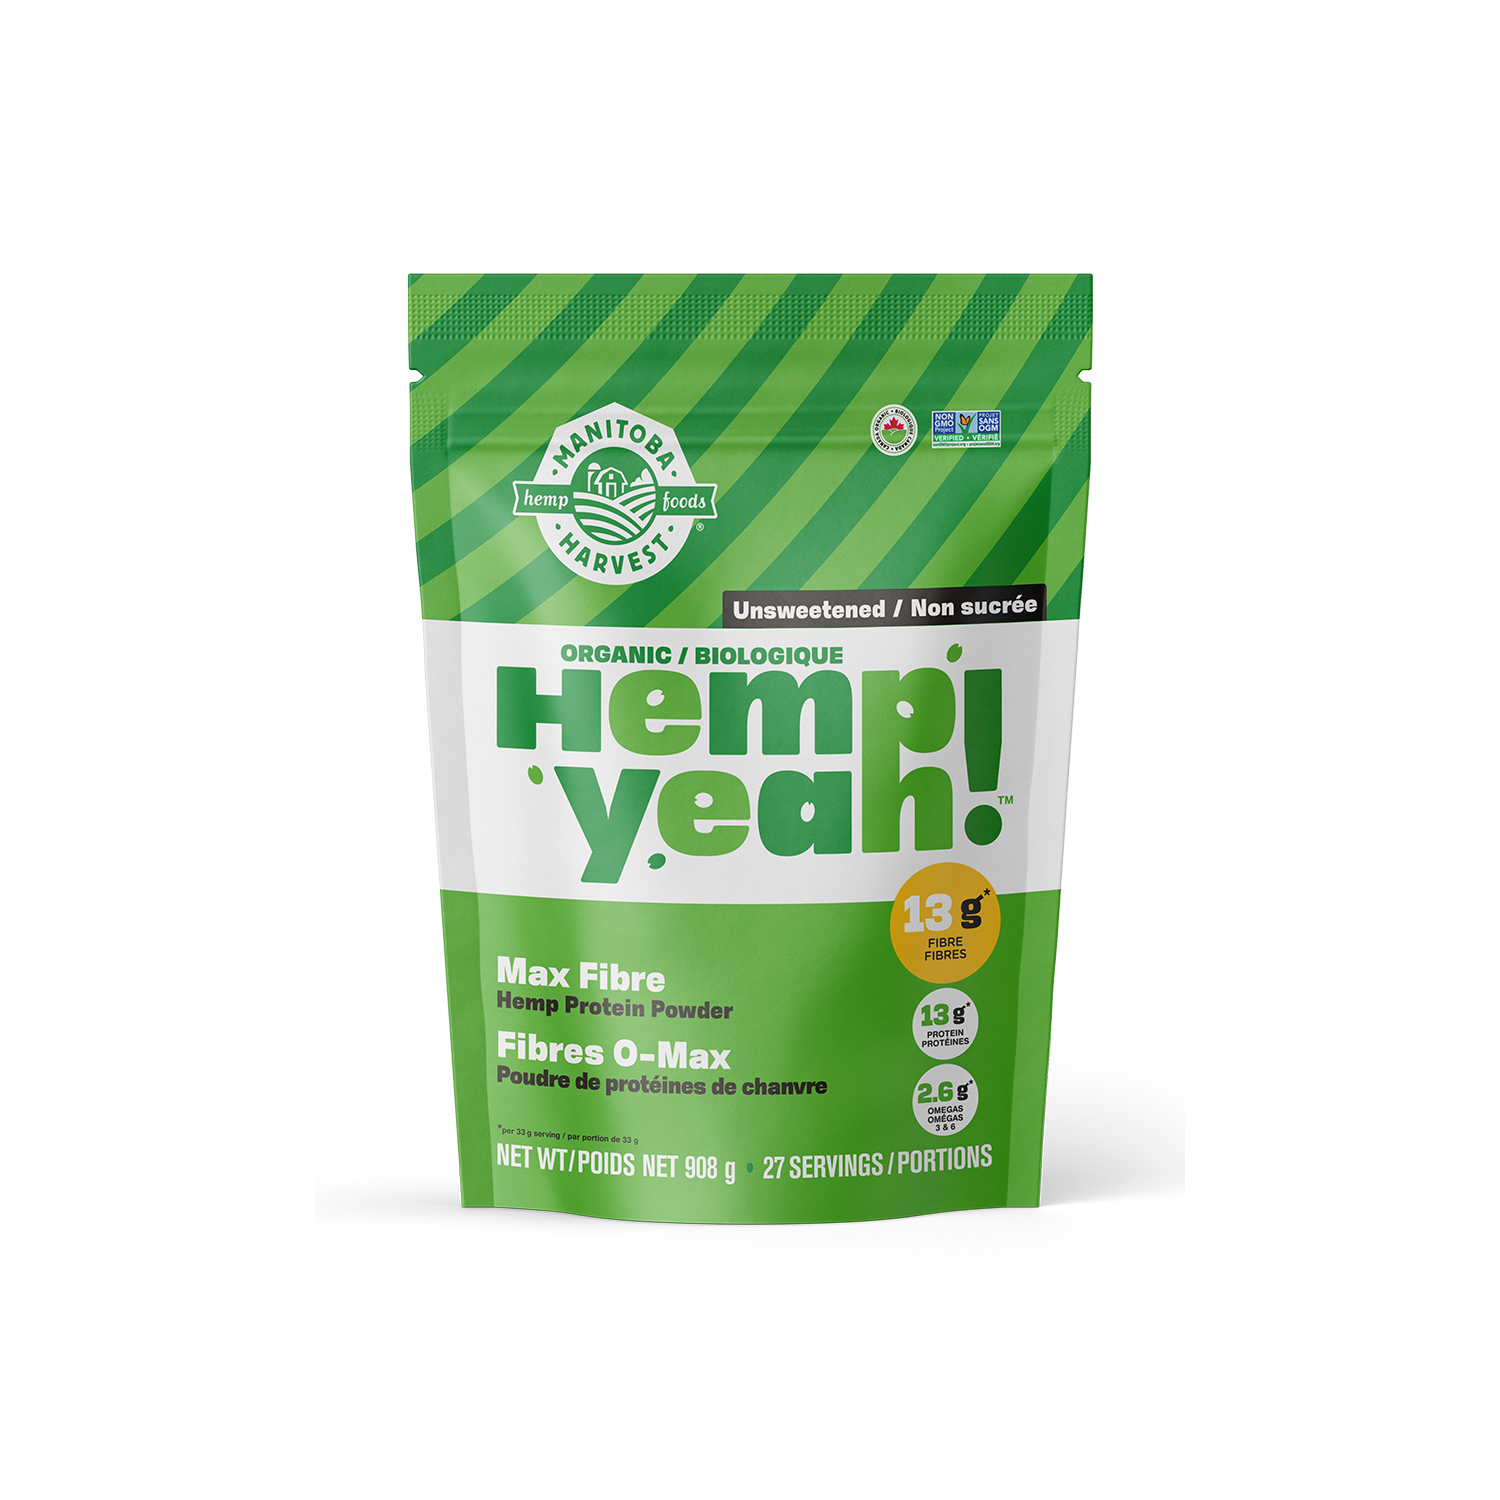 Hemp Yeah! Max Fibre Unsweetened - 908g - by Manitoba Harvest |ProCare Outlet|